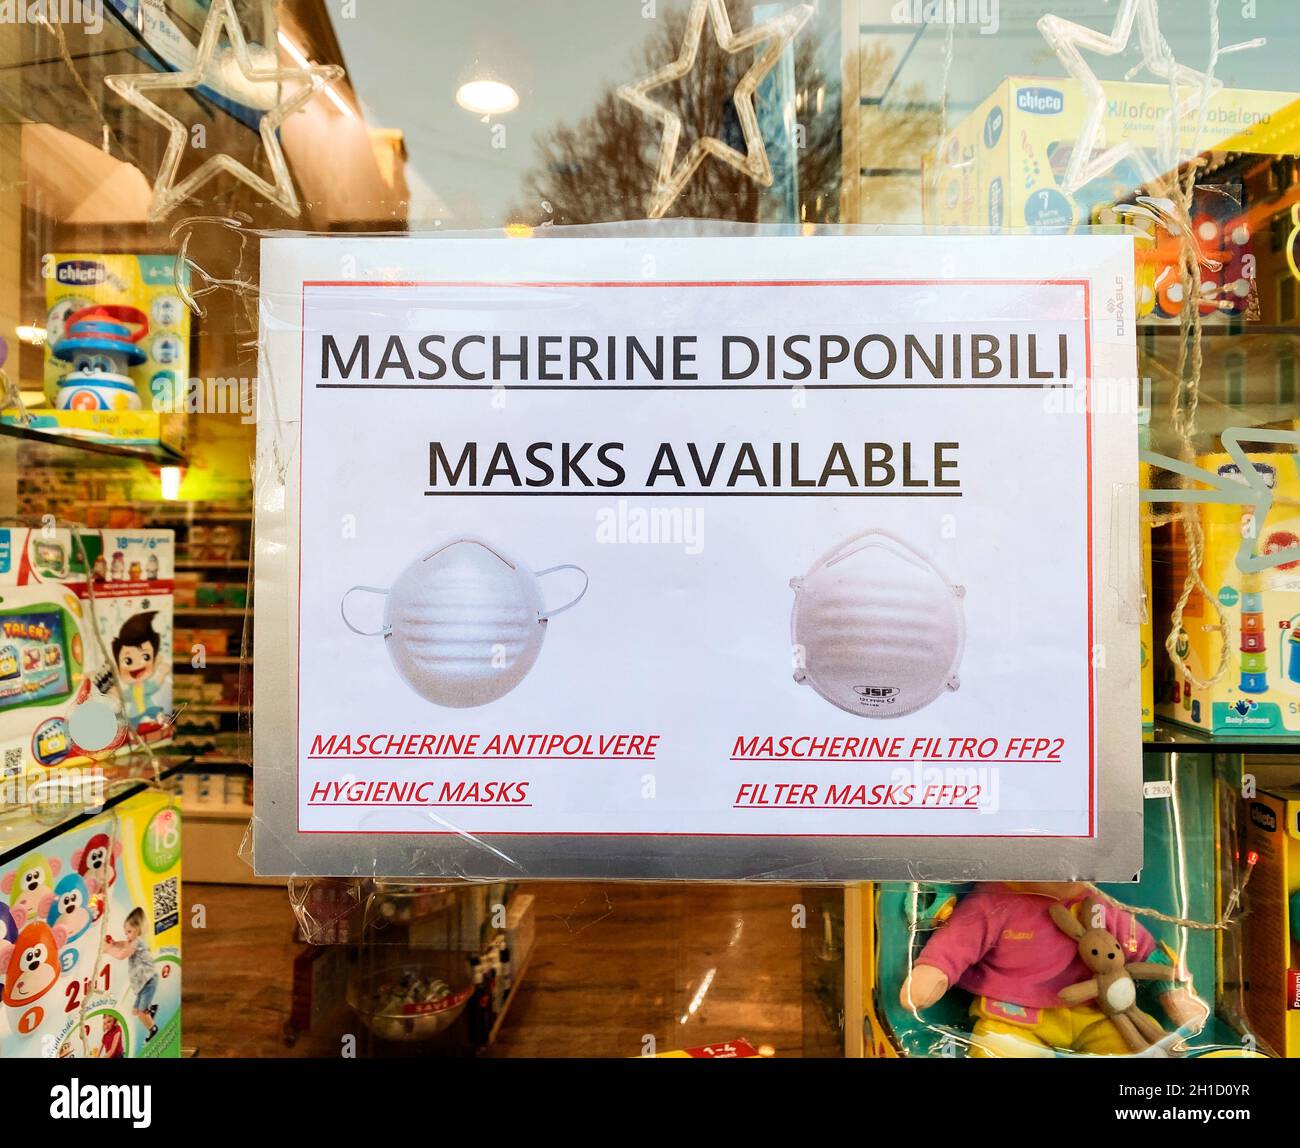 Rome, Italy, February 2020: a sign displayed in the window of an Italian pharmacy indicating the availability of hygiene masks to counteract the coron Stock Photo